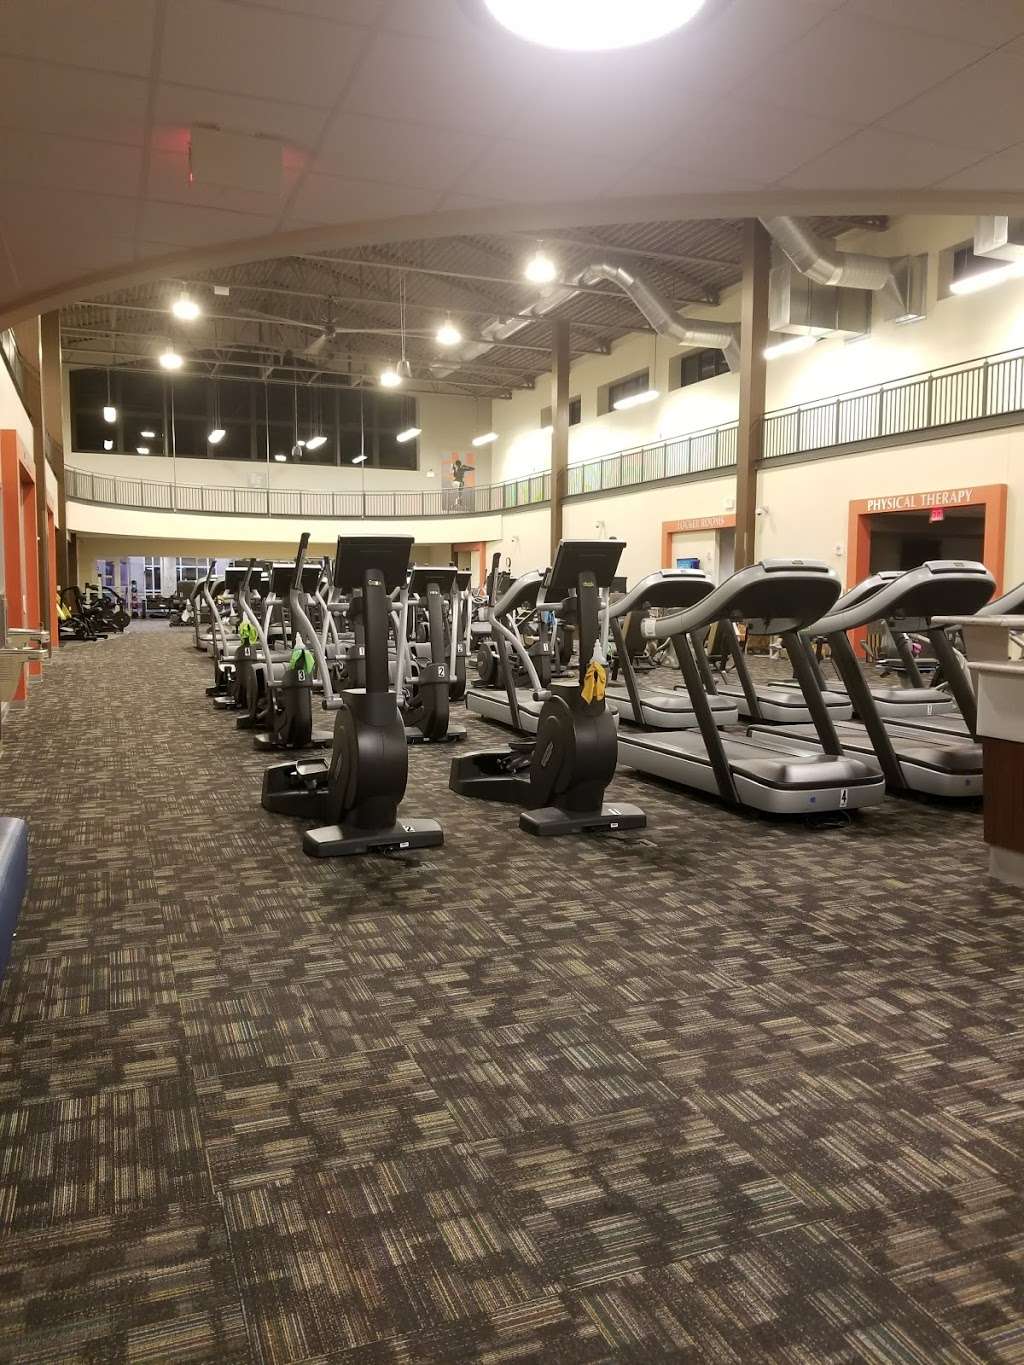 Hancock Wellness Center | 8505 N Clearview Dr, McCordsville, IN 46055 | Phone: (317) 335-6939